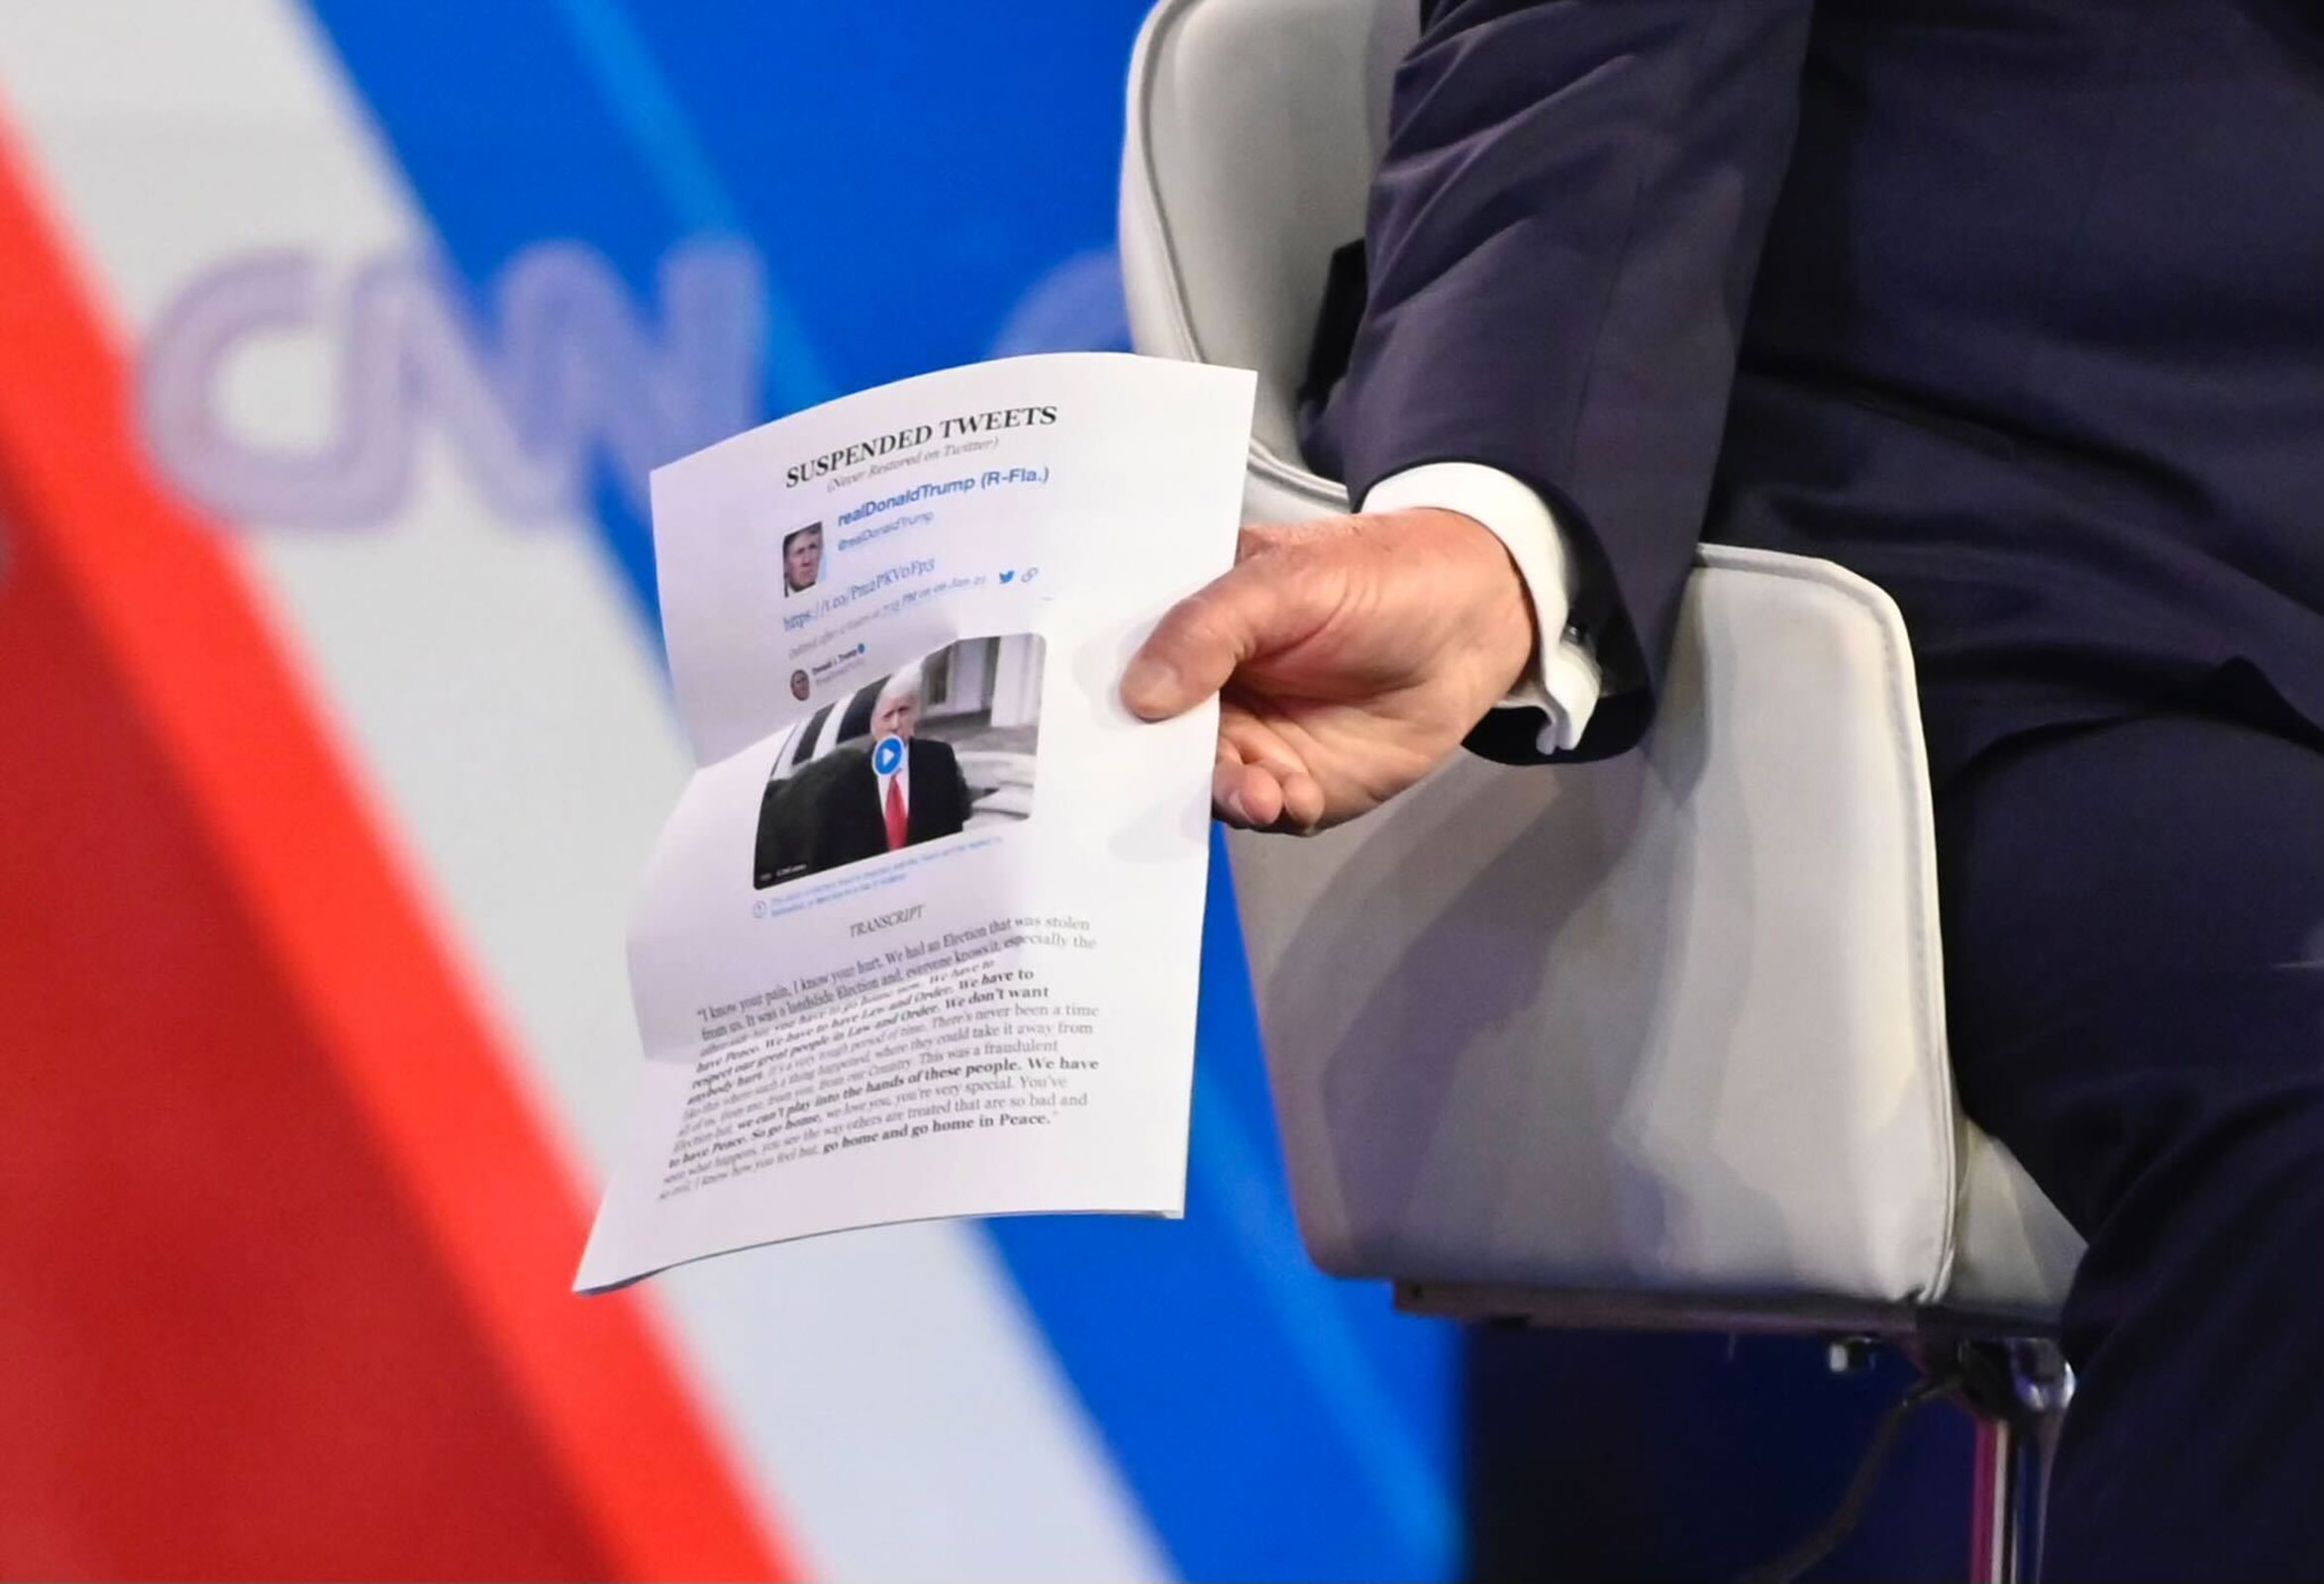 Trump holds notes of his tweets. The top of the page says, "SUSPENDED TWEETS (Now Restored on Twitter)."